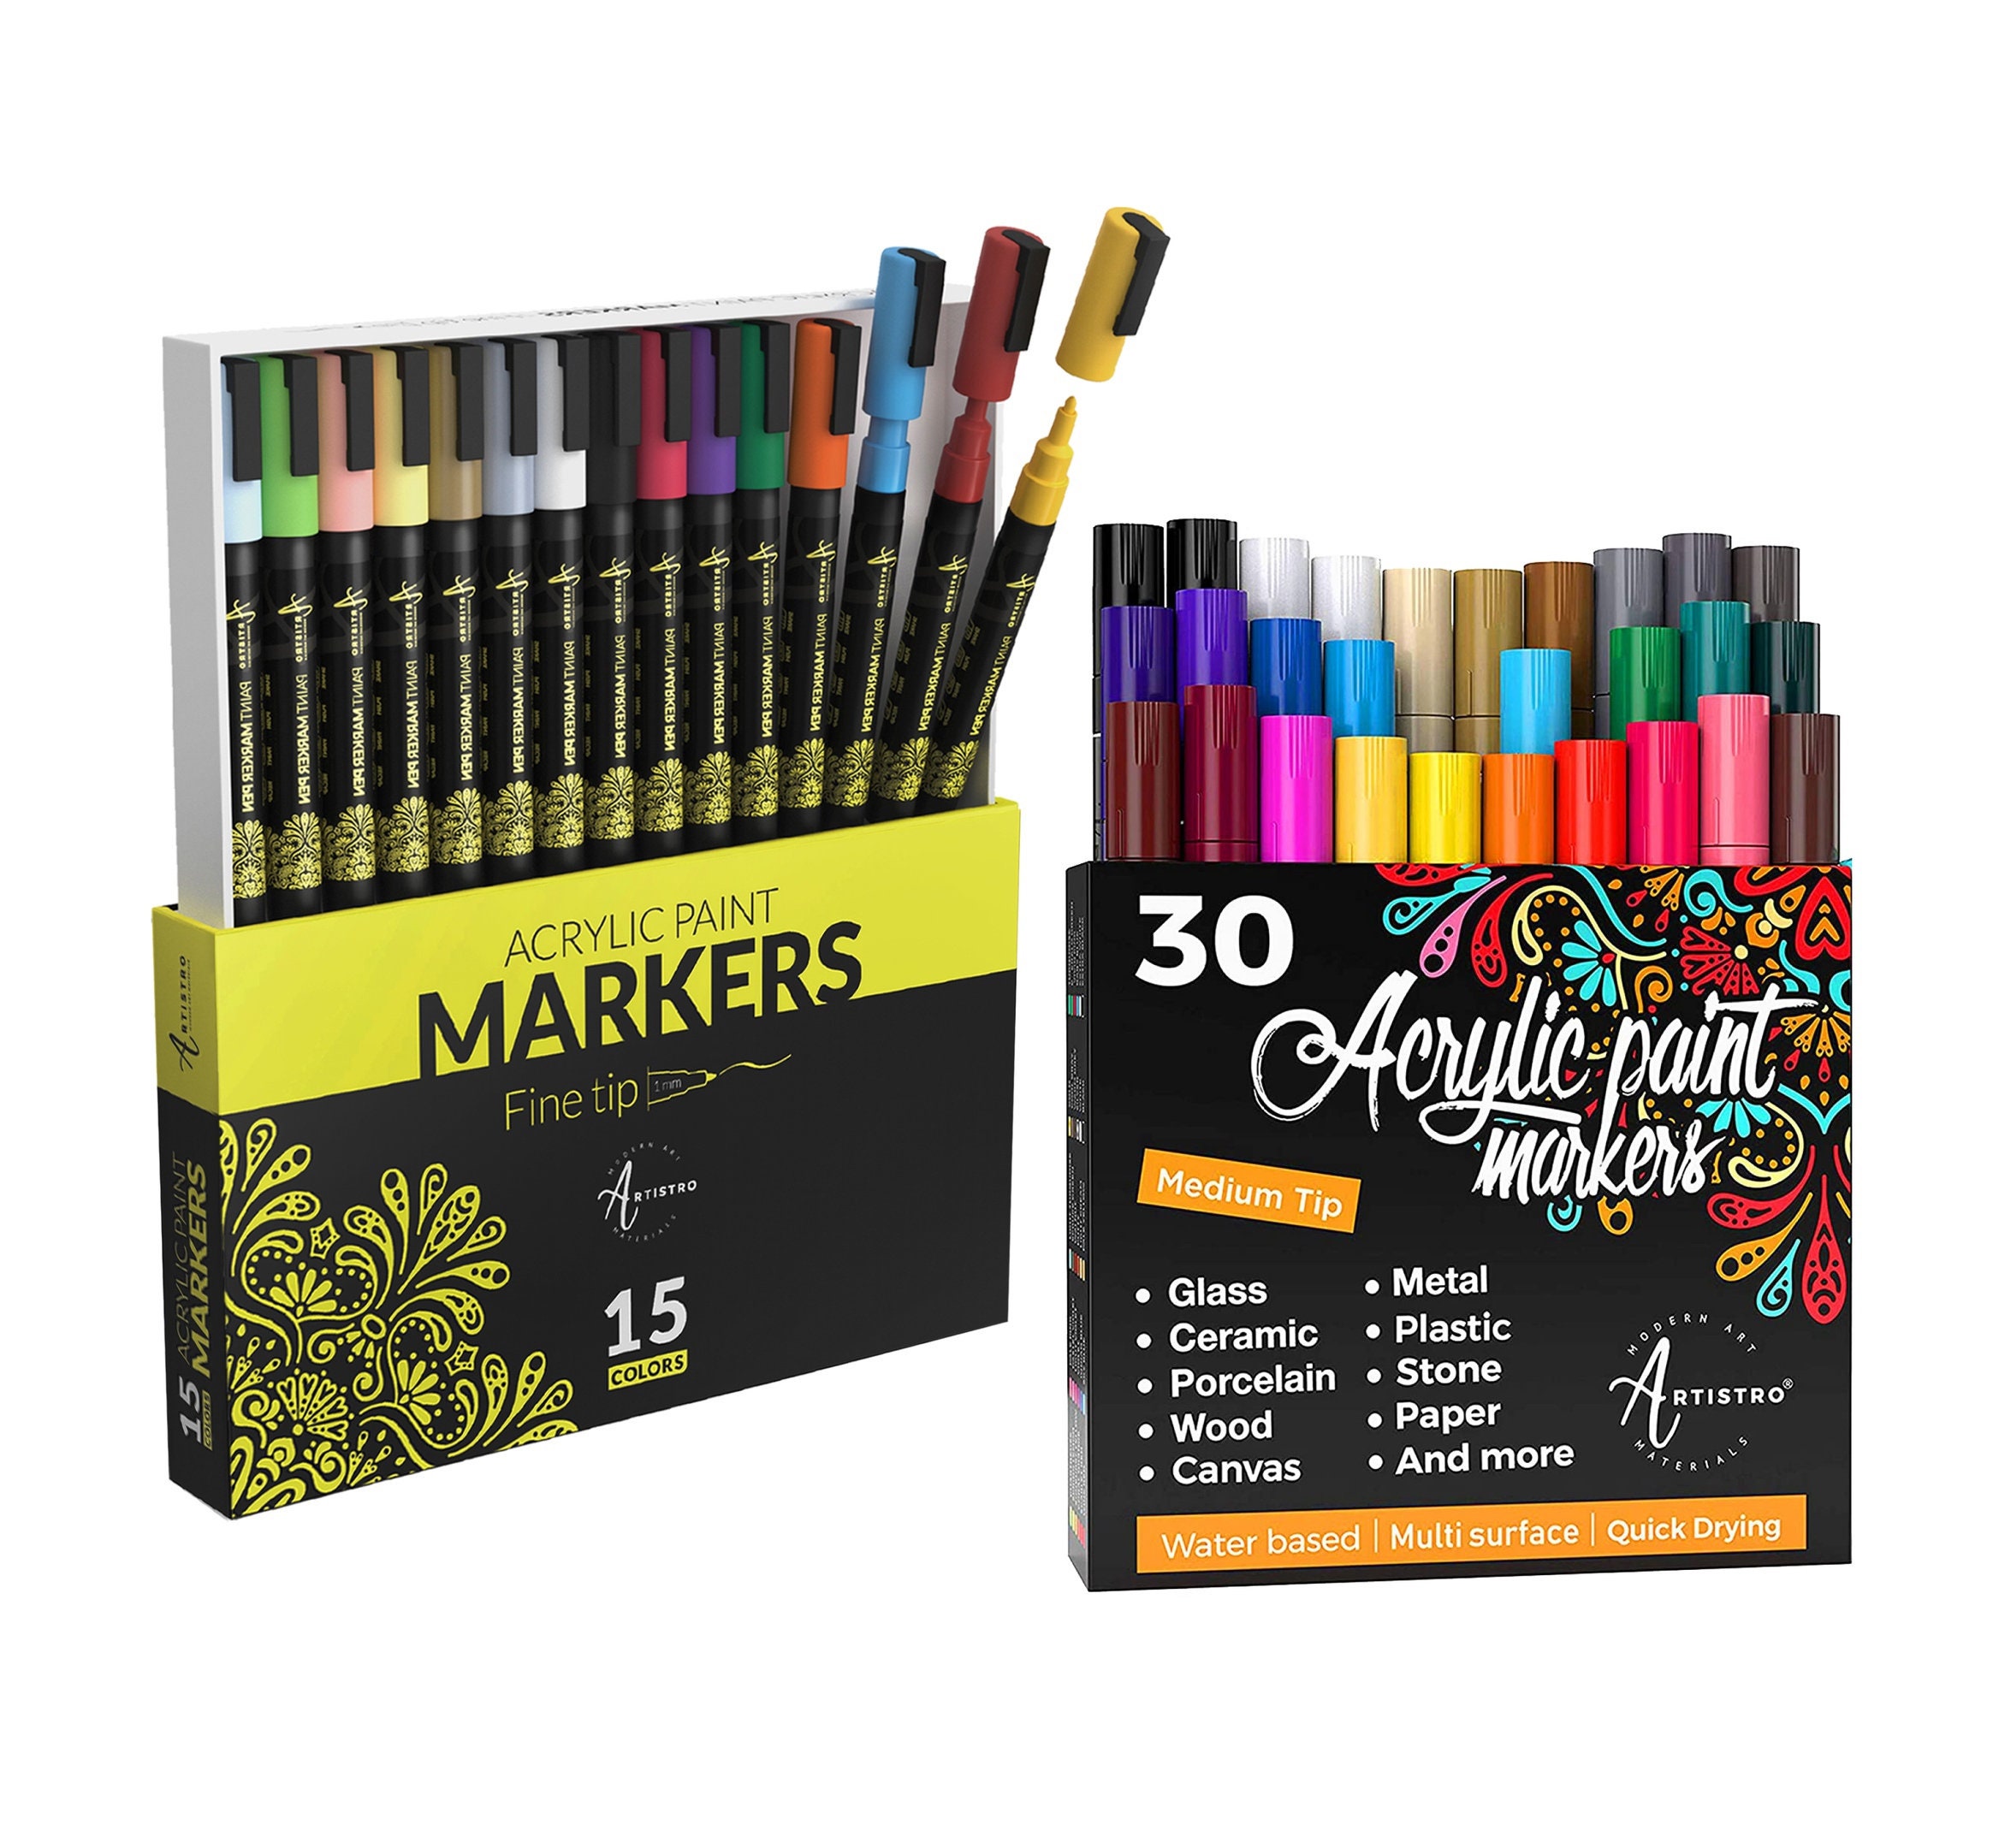 Cute Paint Pen Acrylic Markers for Family Painting, Set of 15 Markers, Wood  Art, Glass Art, Best Friend Gift, Artist Gift, Craft Tool 